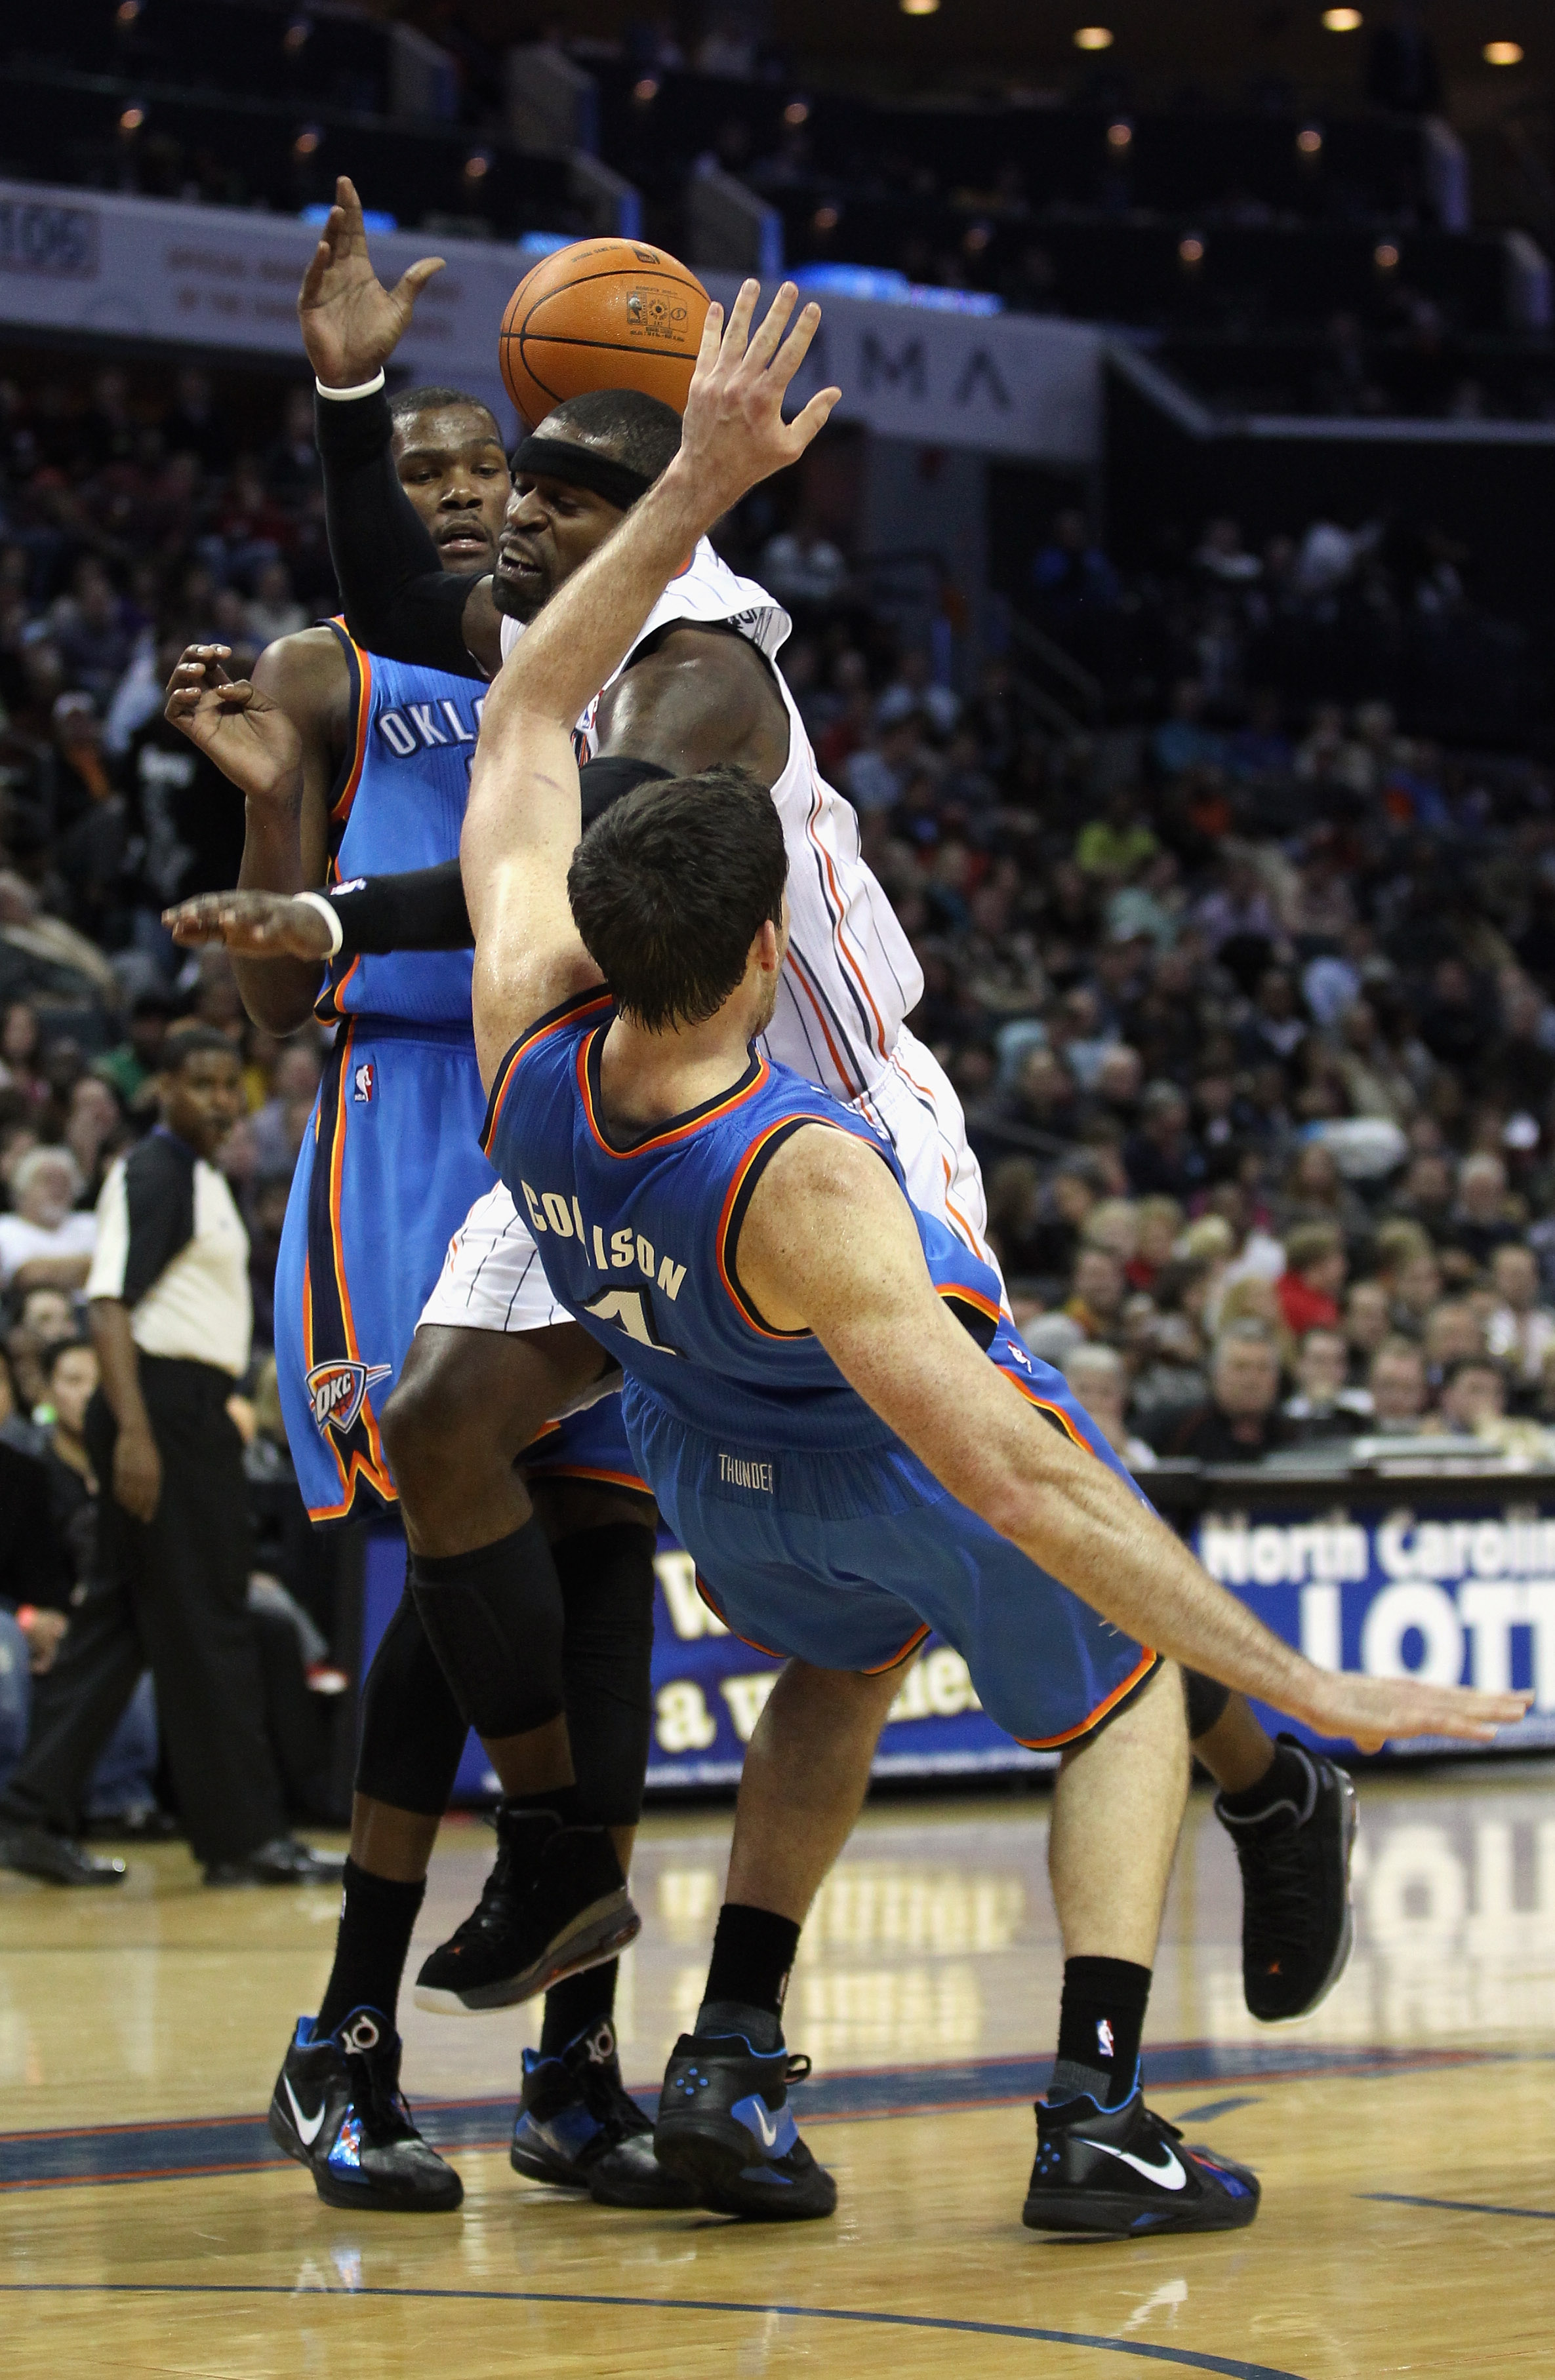 CHARLOTTE, NC - DECEMBER 21:  Teammates Kevin Durant #35 and Nick Collison #4 of the Oklahoma Thunder try to stop Stephen Jackson #1 of the Charlotte Bobcats during their game at Time Warner Cable Arena on December 21, 2010 in Charlotte, North Carolina. N